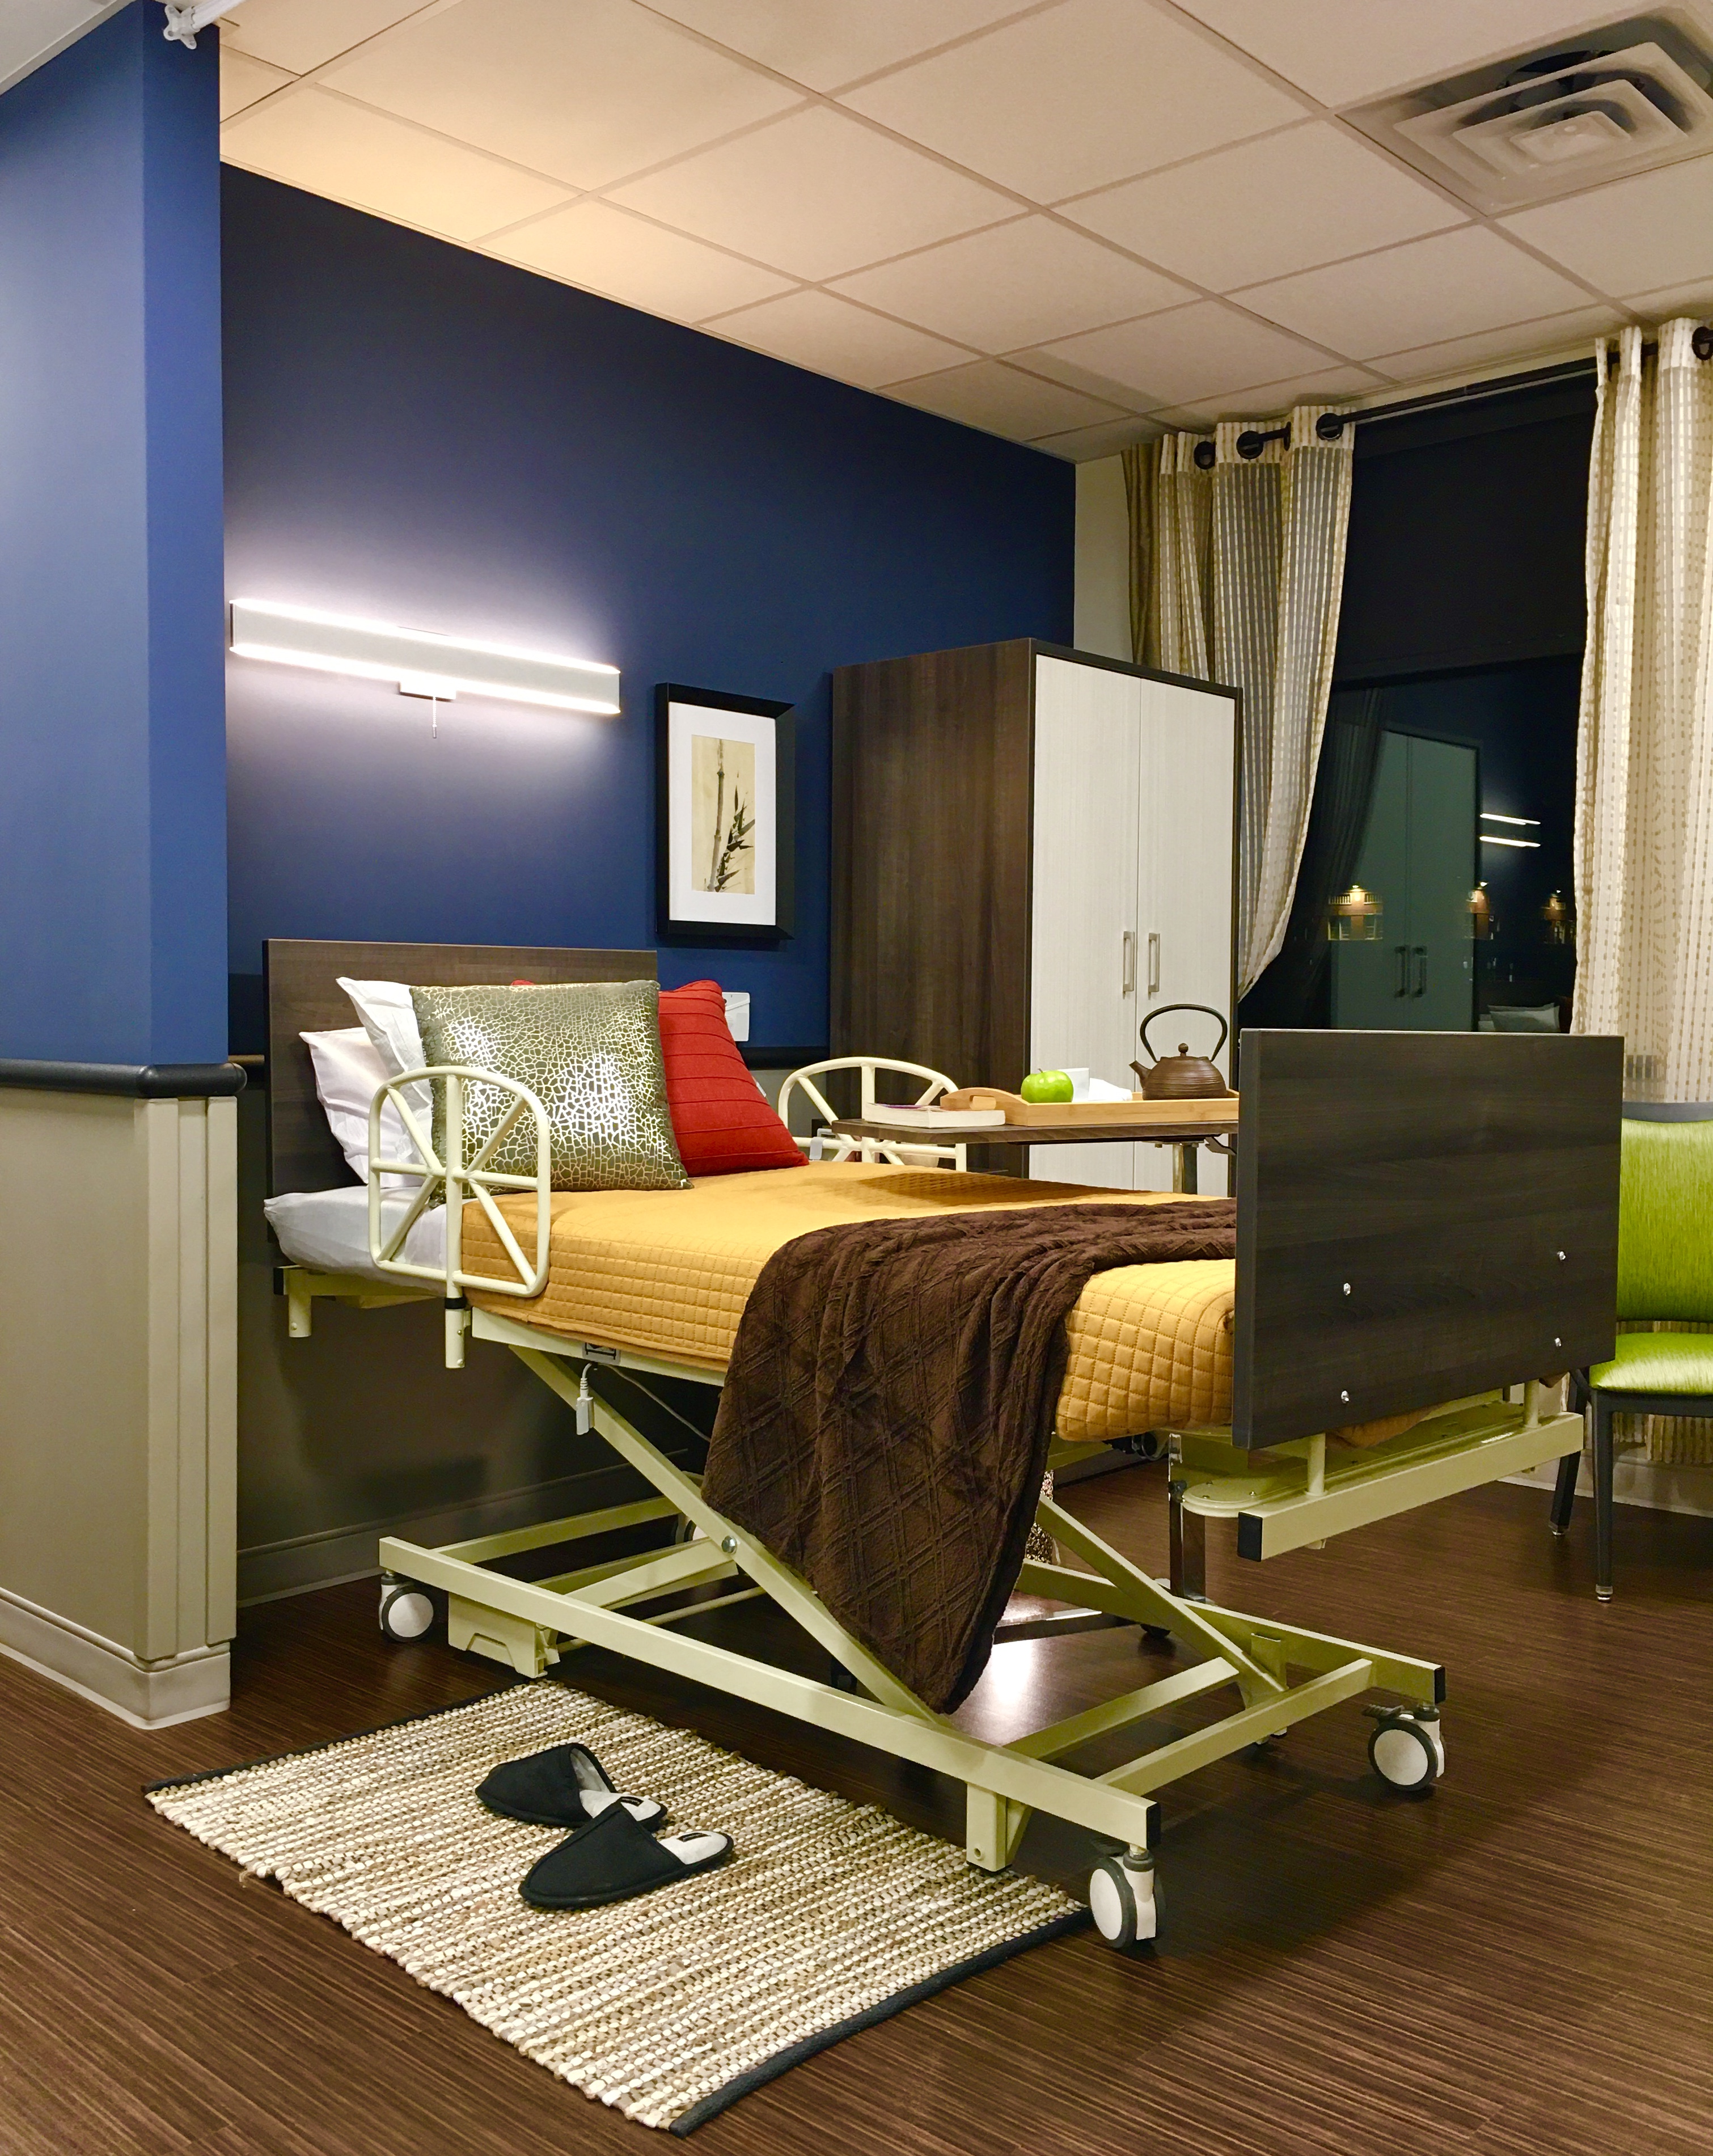 Brooklyn Center’s patient rooms are spacious. Photo: Lore Croghan/Brooklyn Eagle